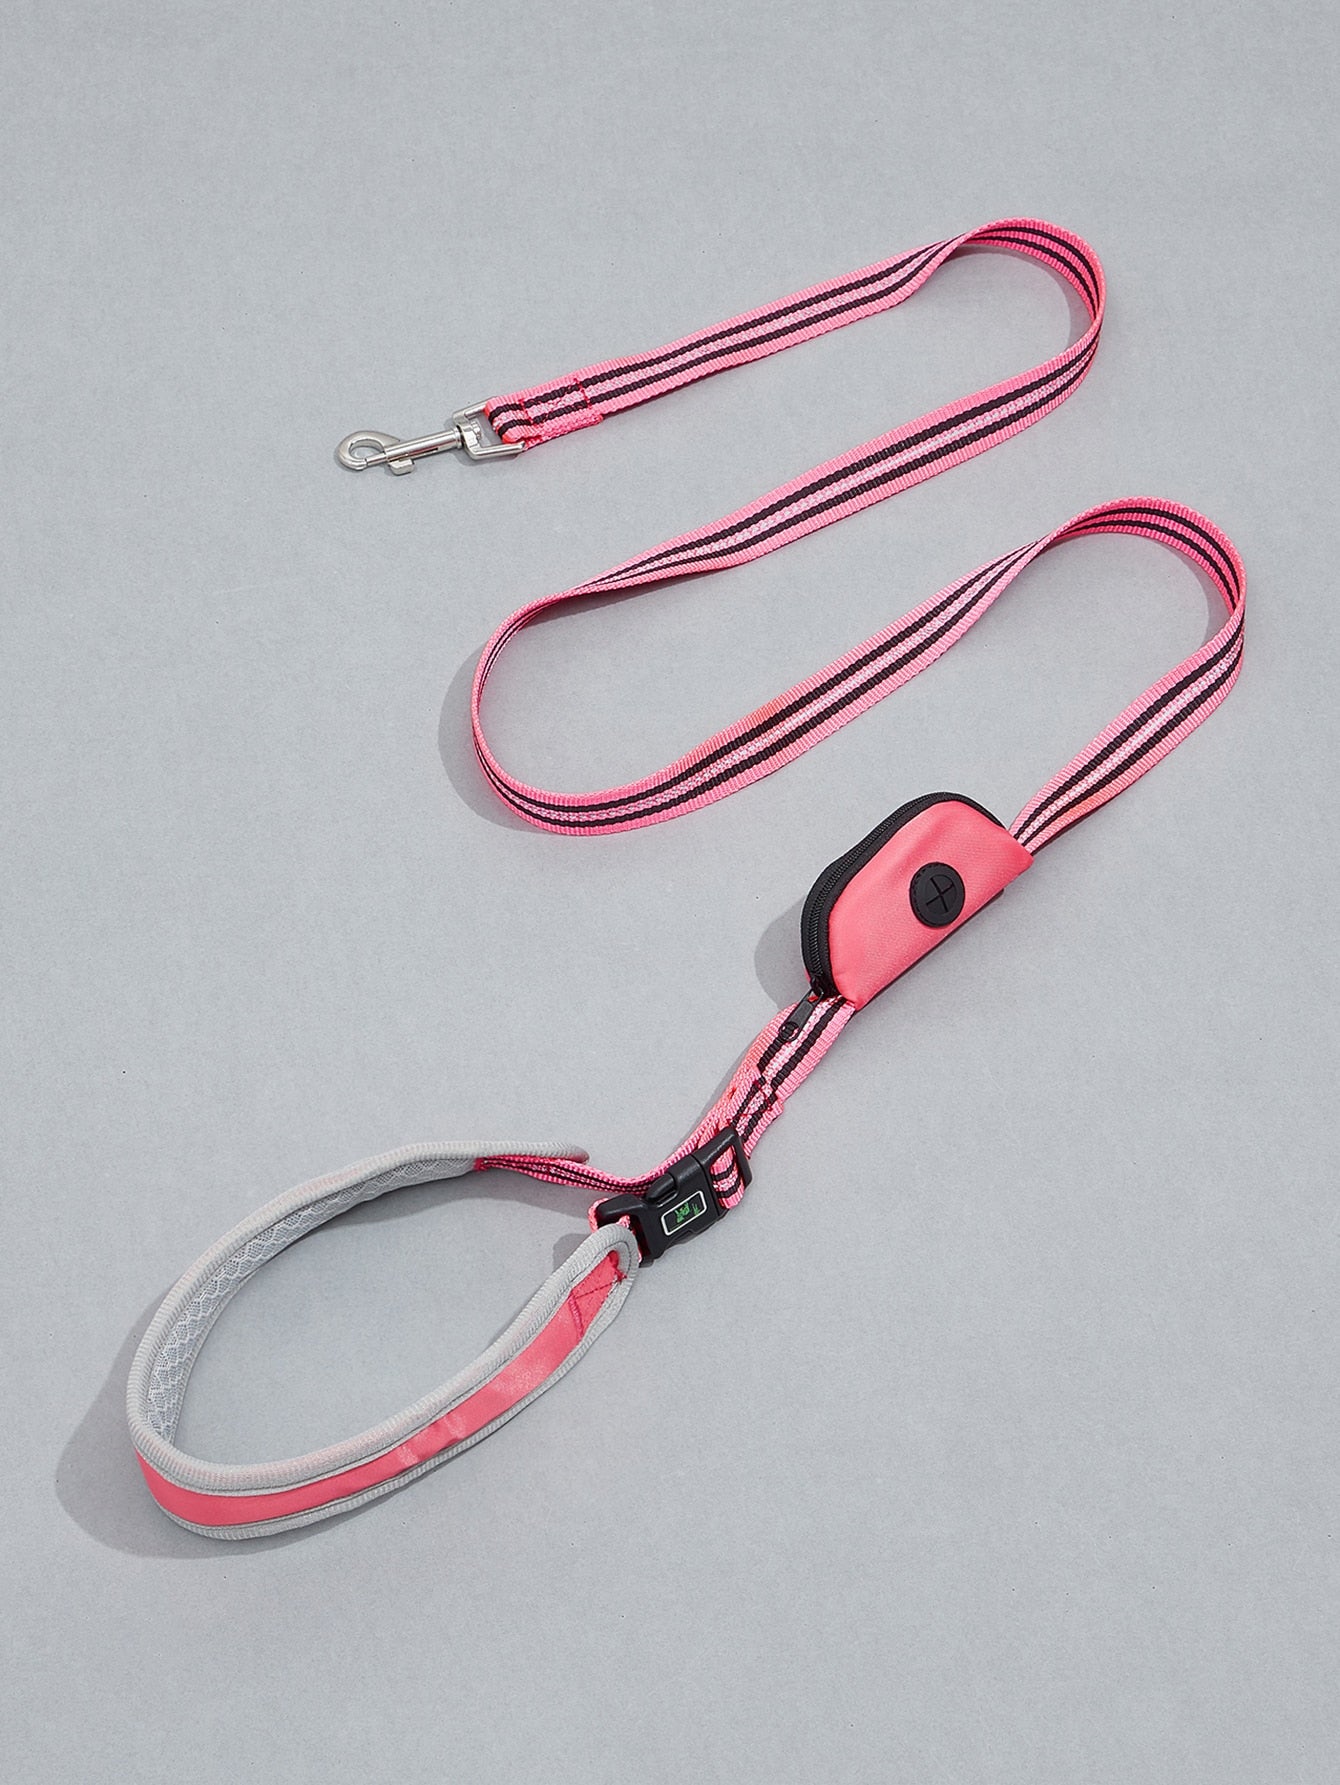 1pc Two Tone Pet Leash With Poopbag Dispenser 1roll Poopbag